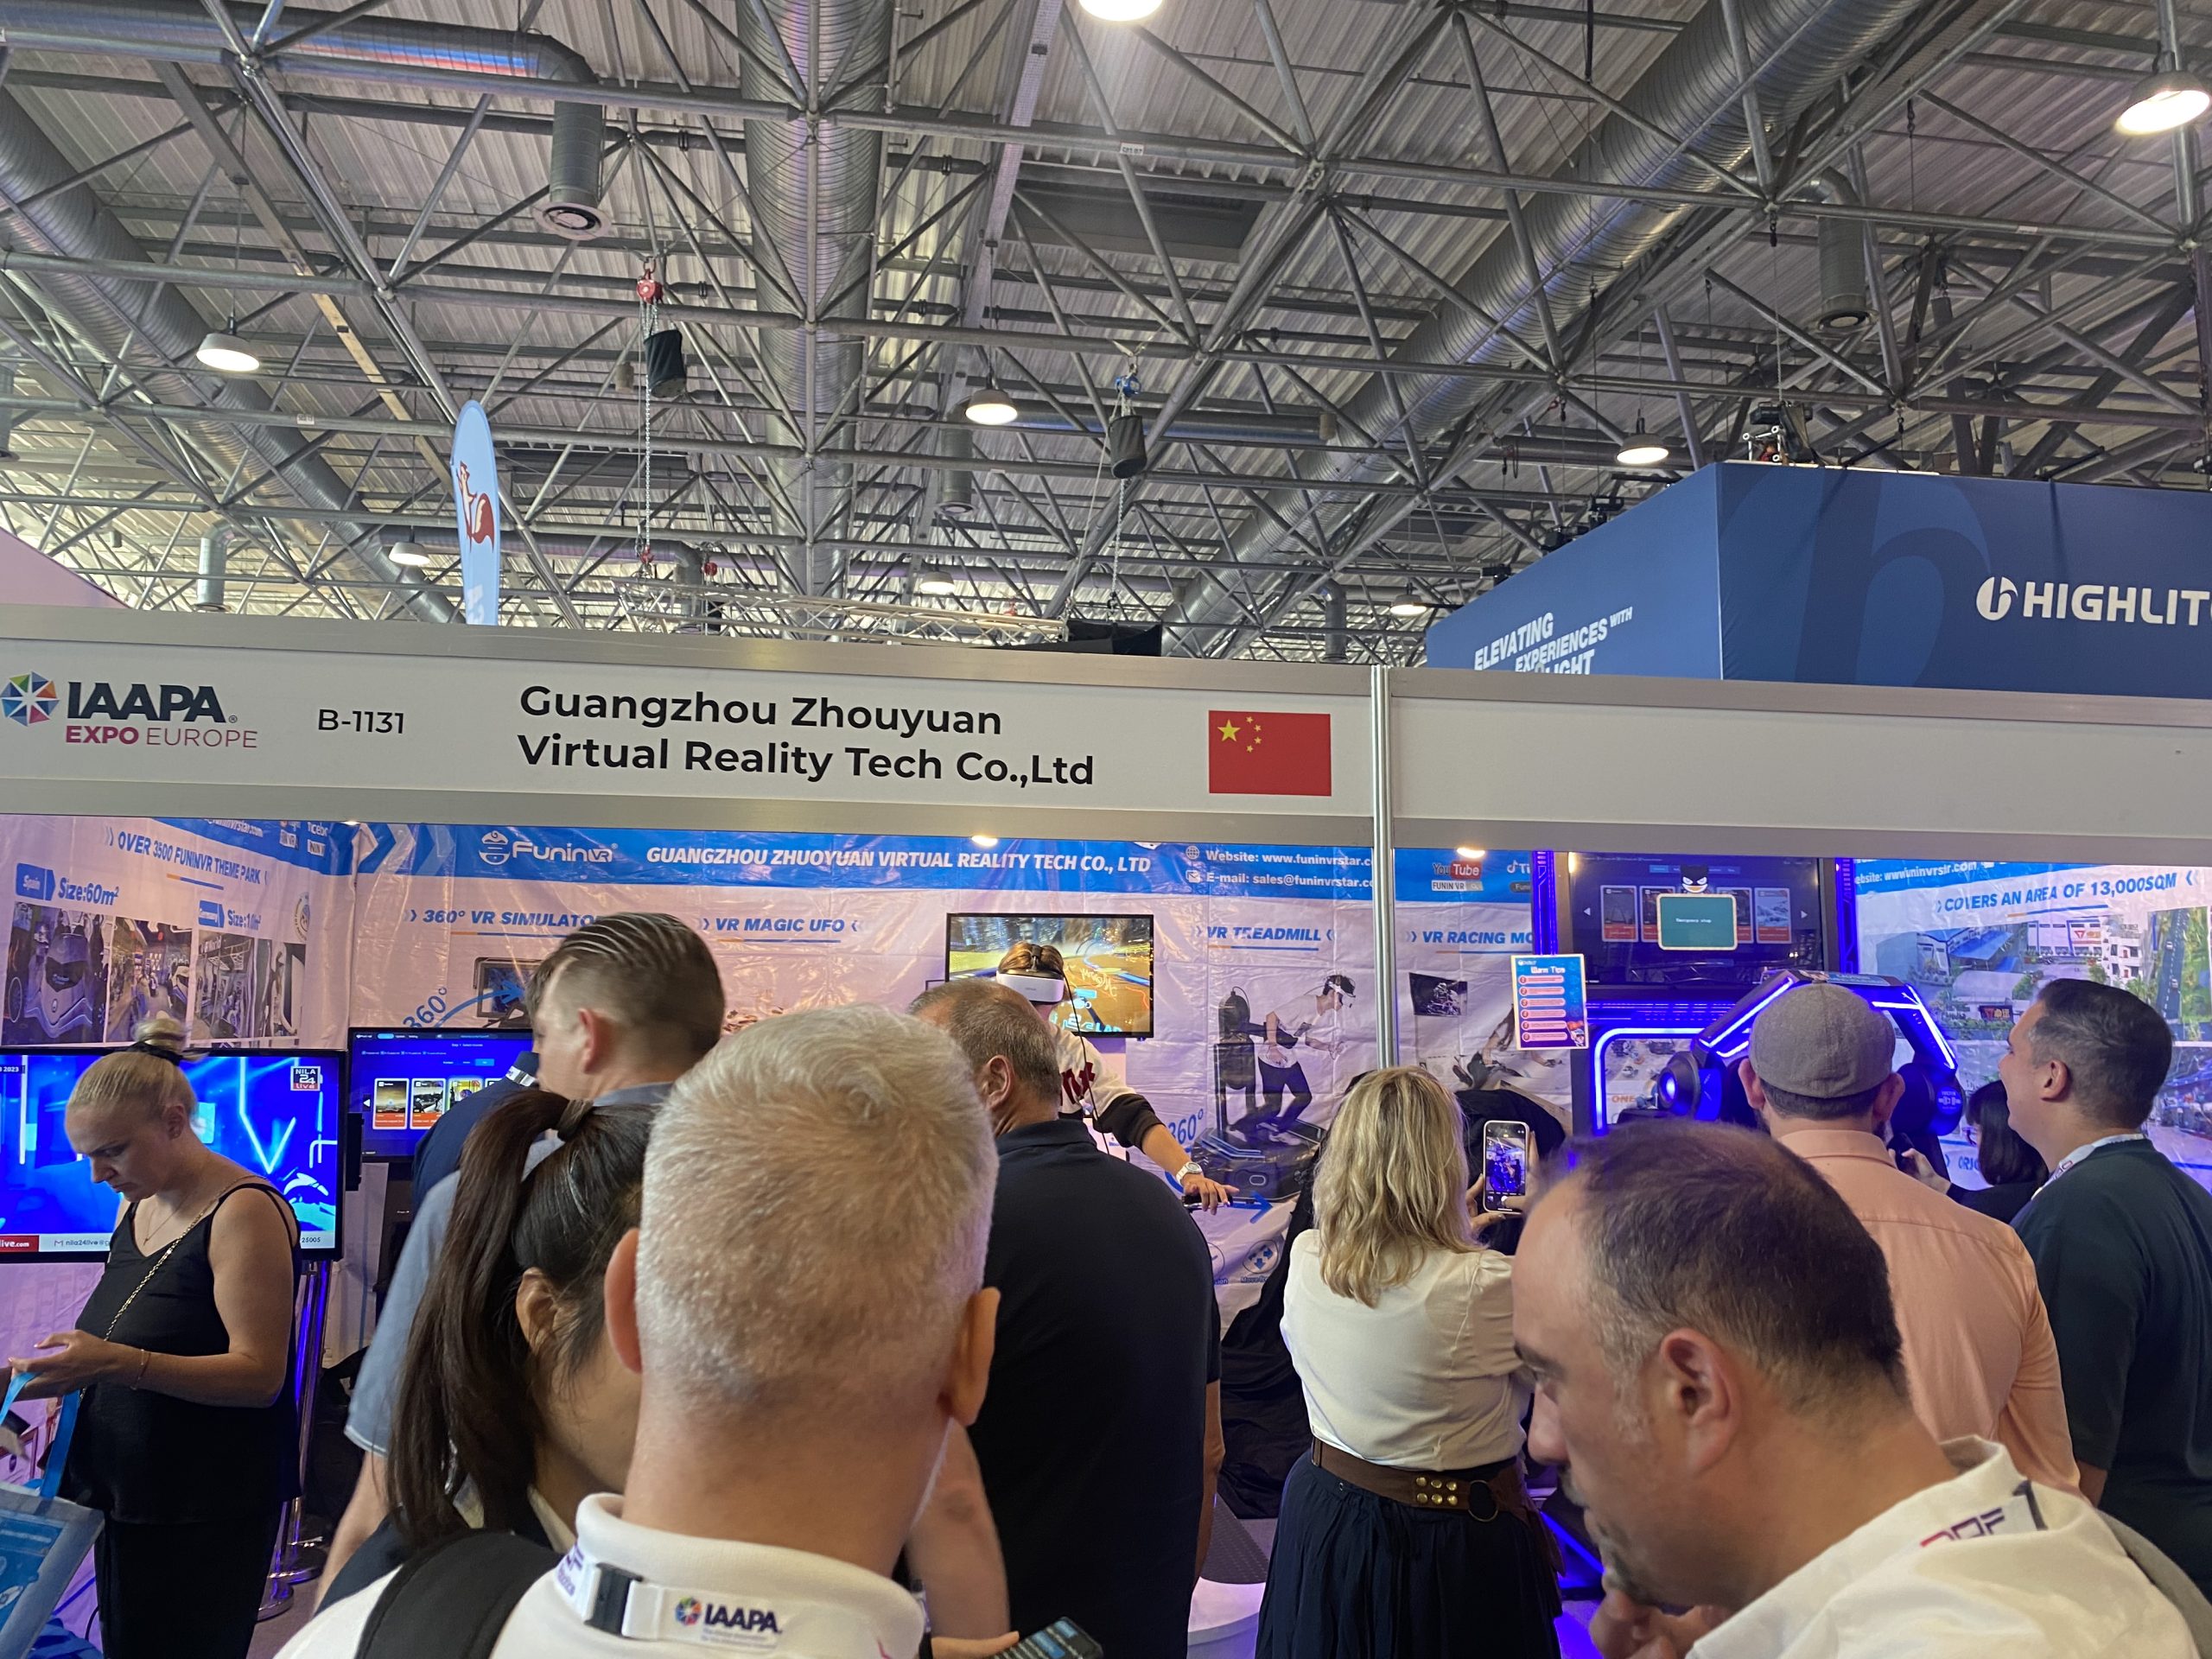 FuninVR Showcased Latest VR Devices at 2023 IAAPA Expo Europe in Austria - Company News - 1